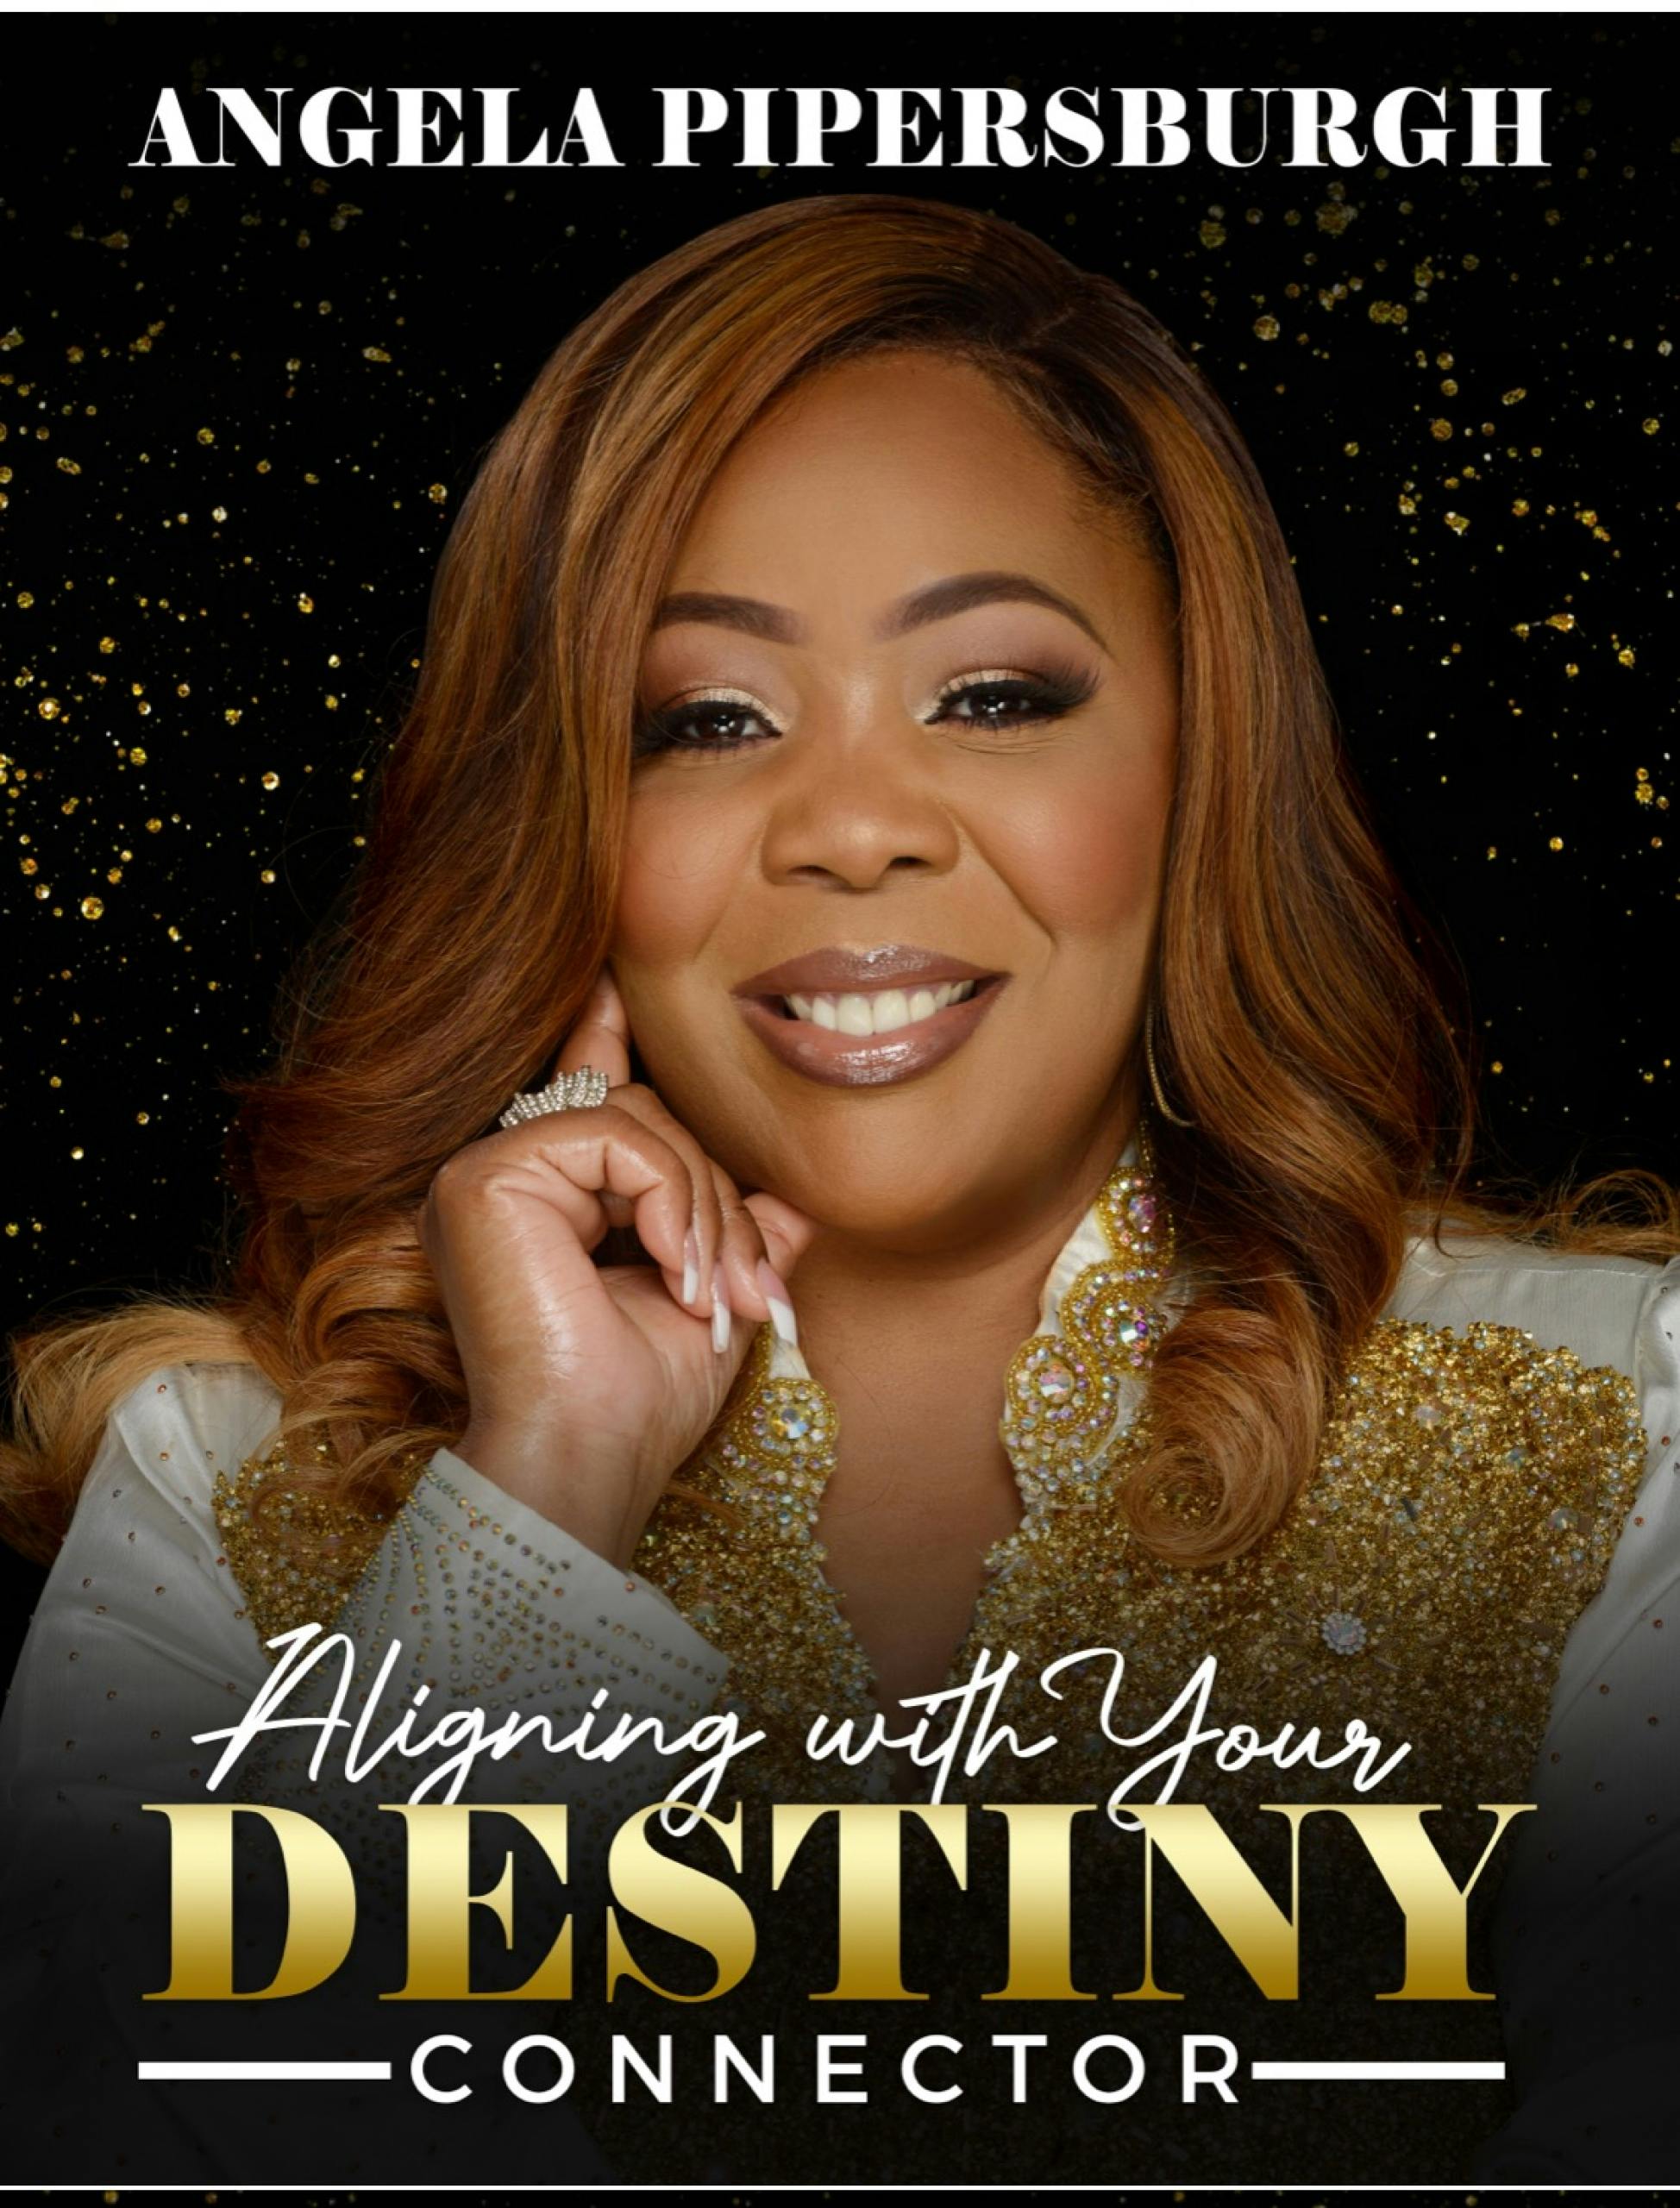 Aligning With Your Destiny Connector - Angela Pipersburgh